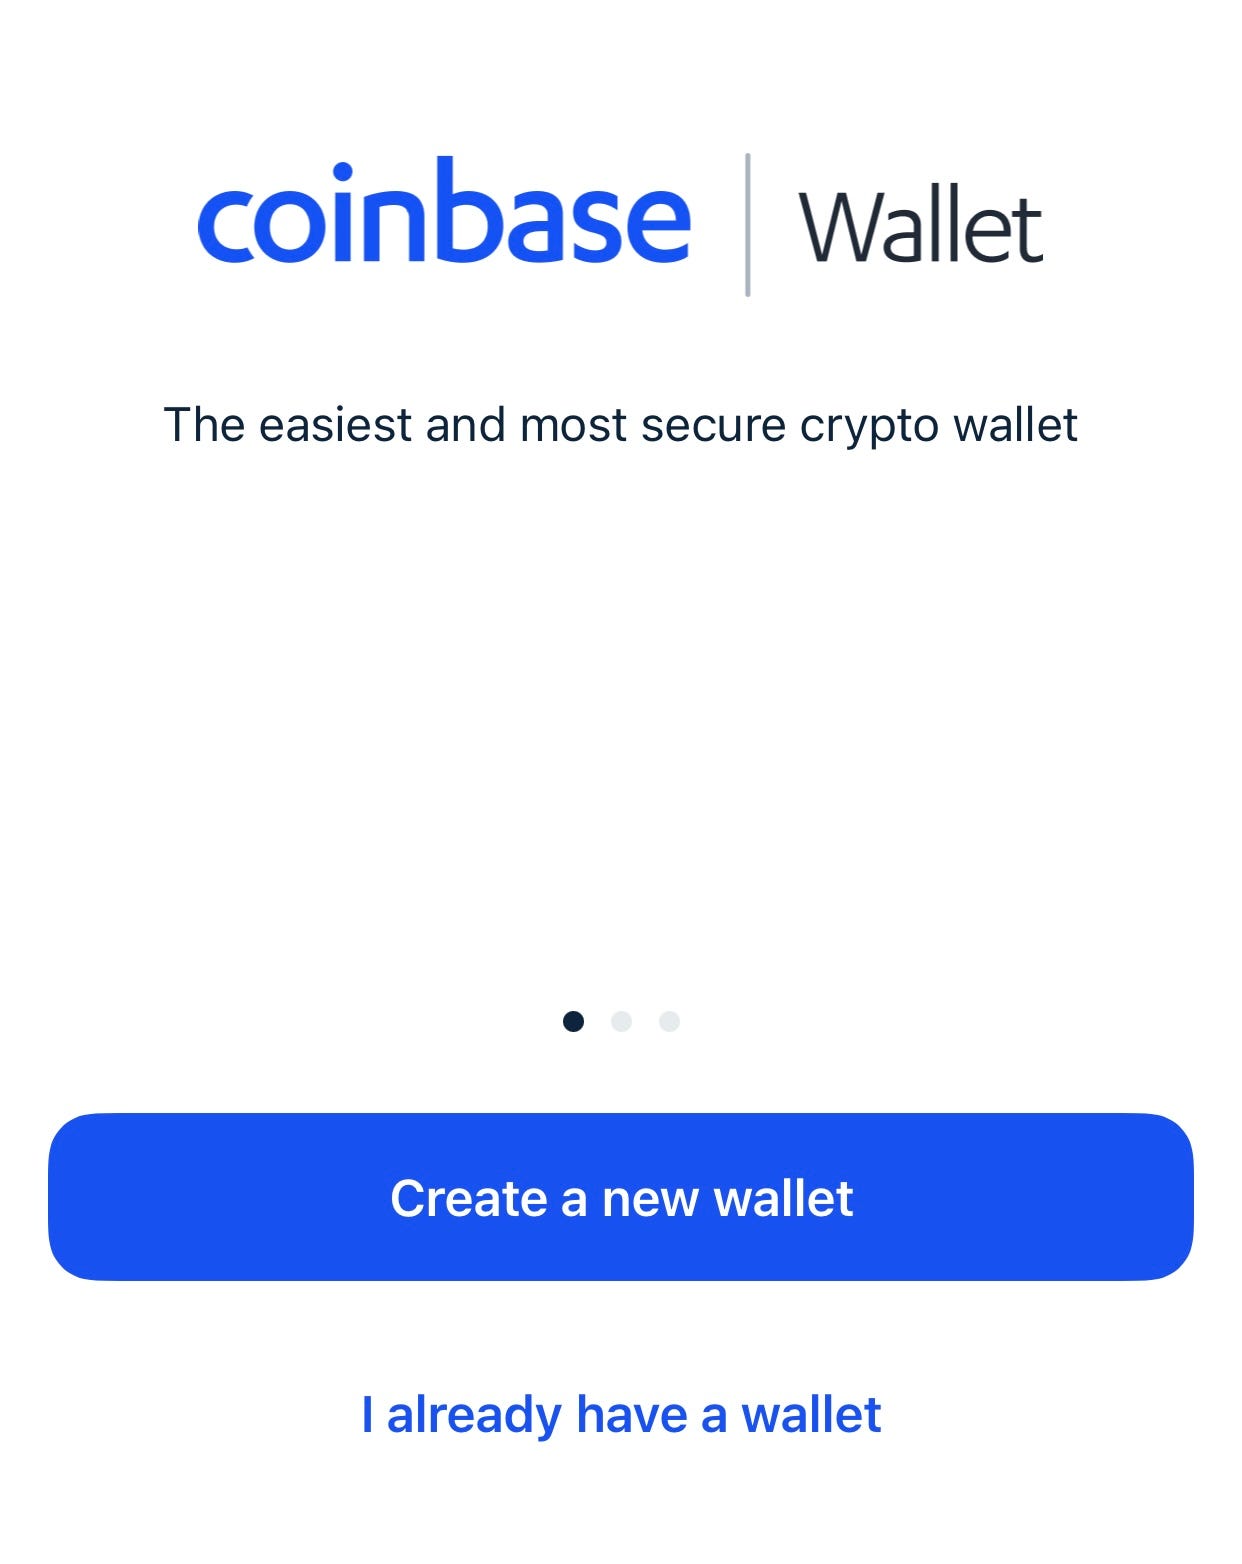 How to secure my coinbase wallet